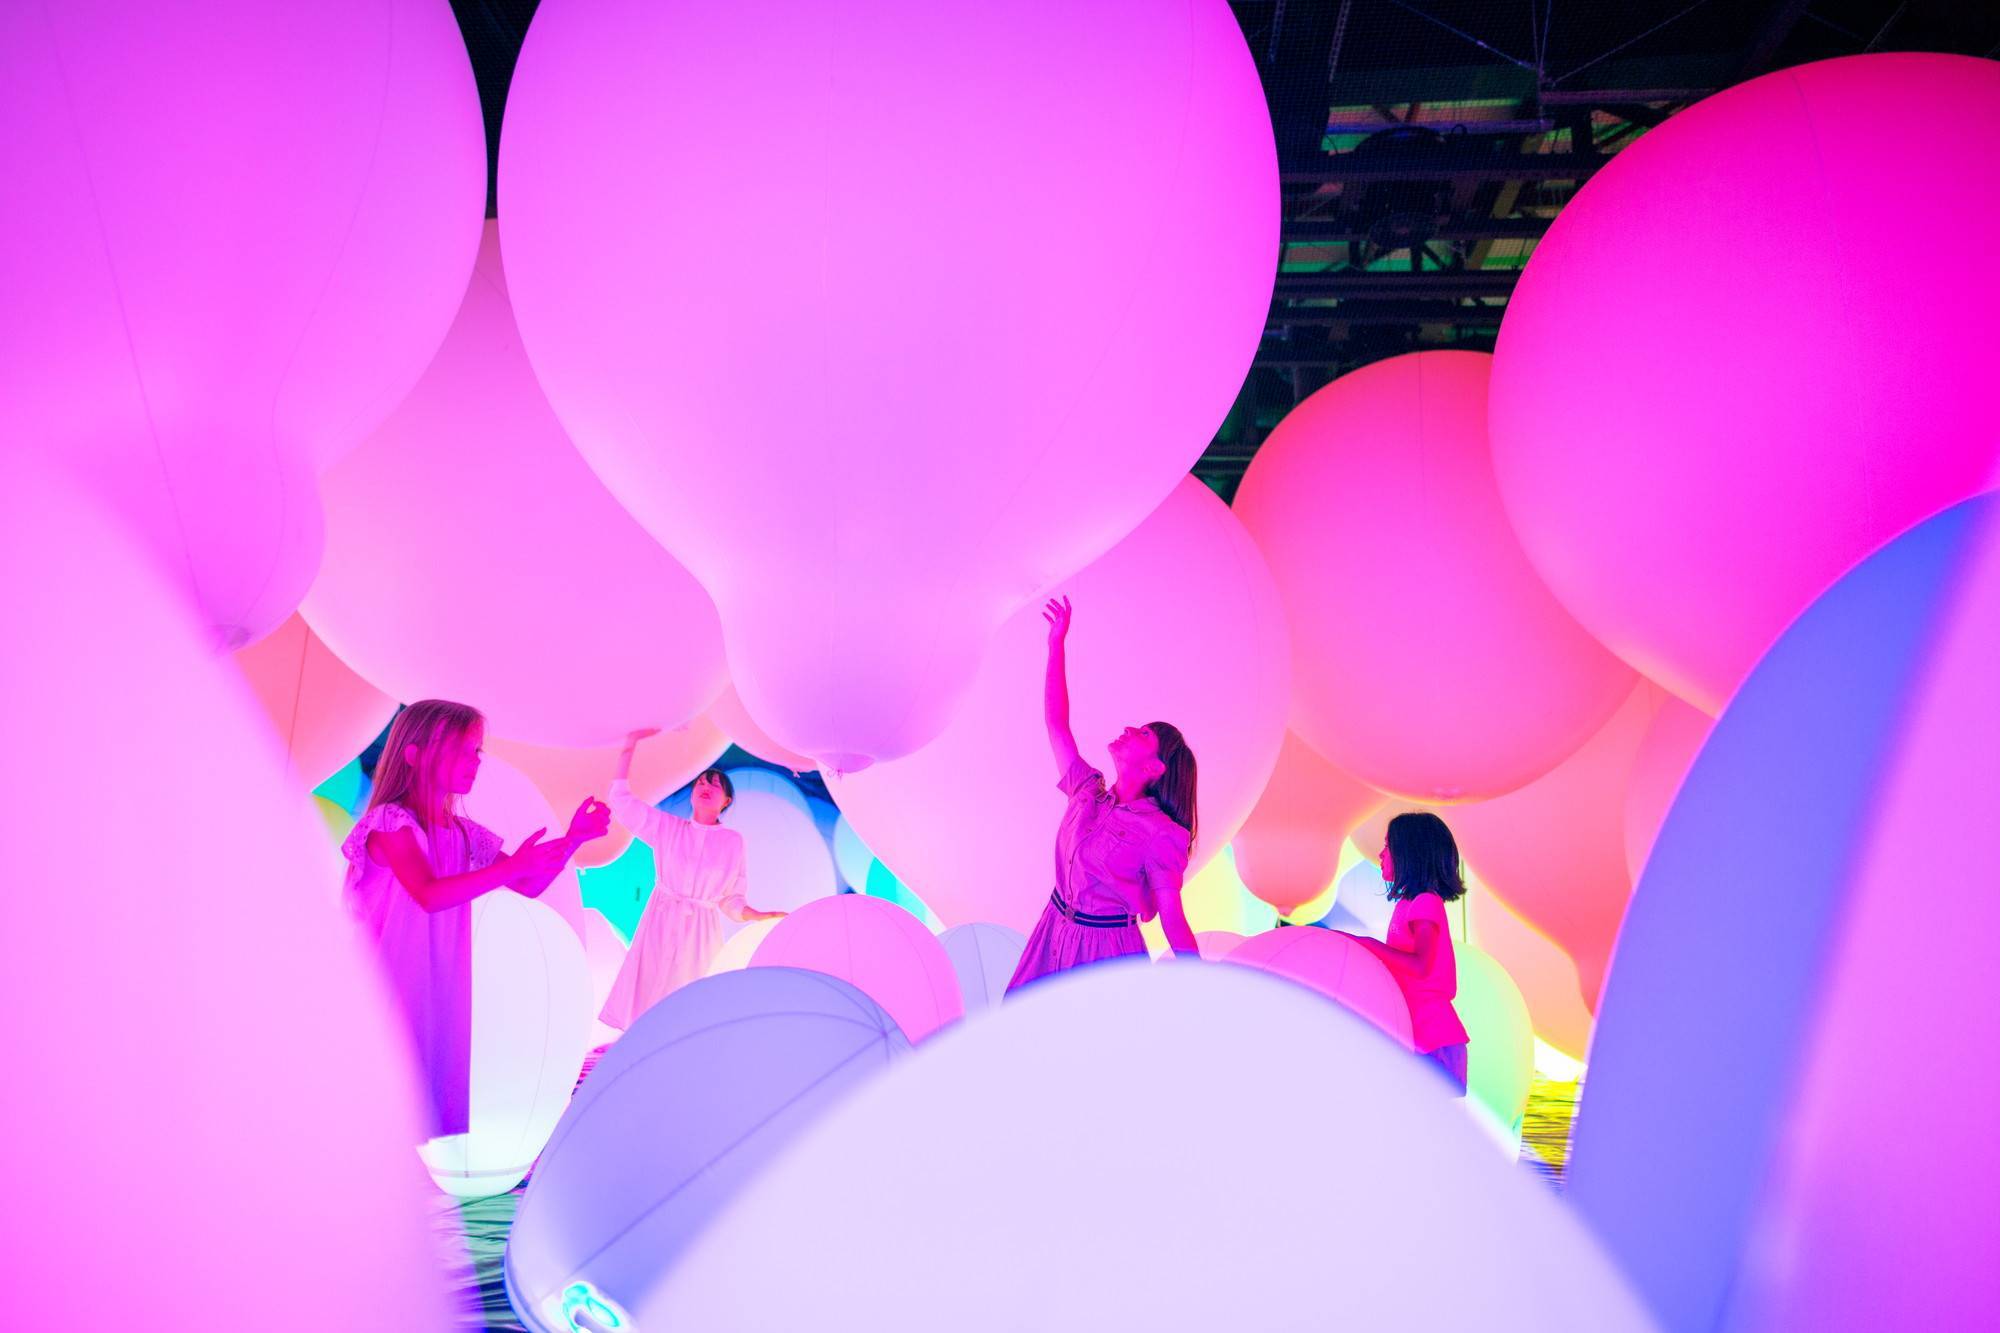 visitor engagement with immersive balloon art installations